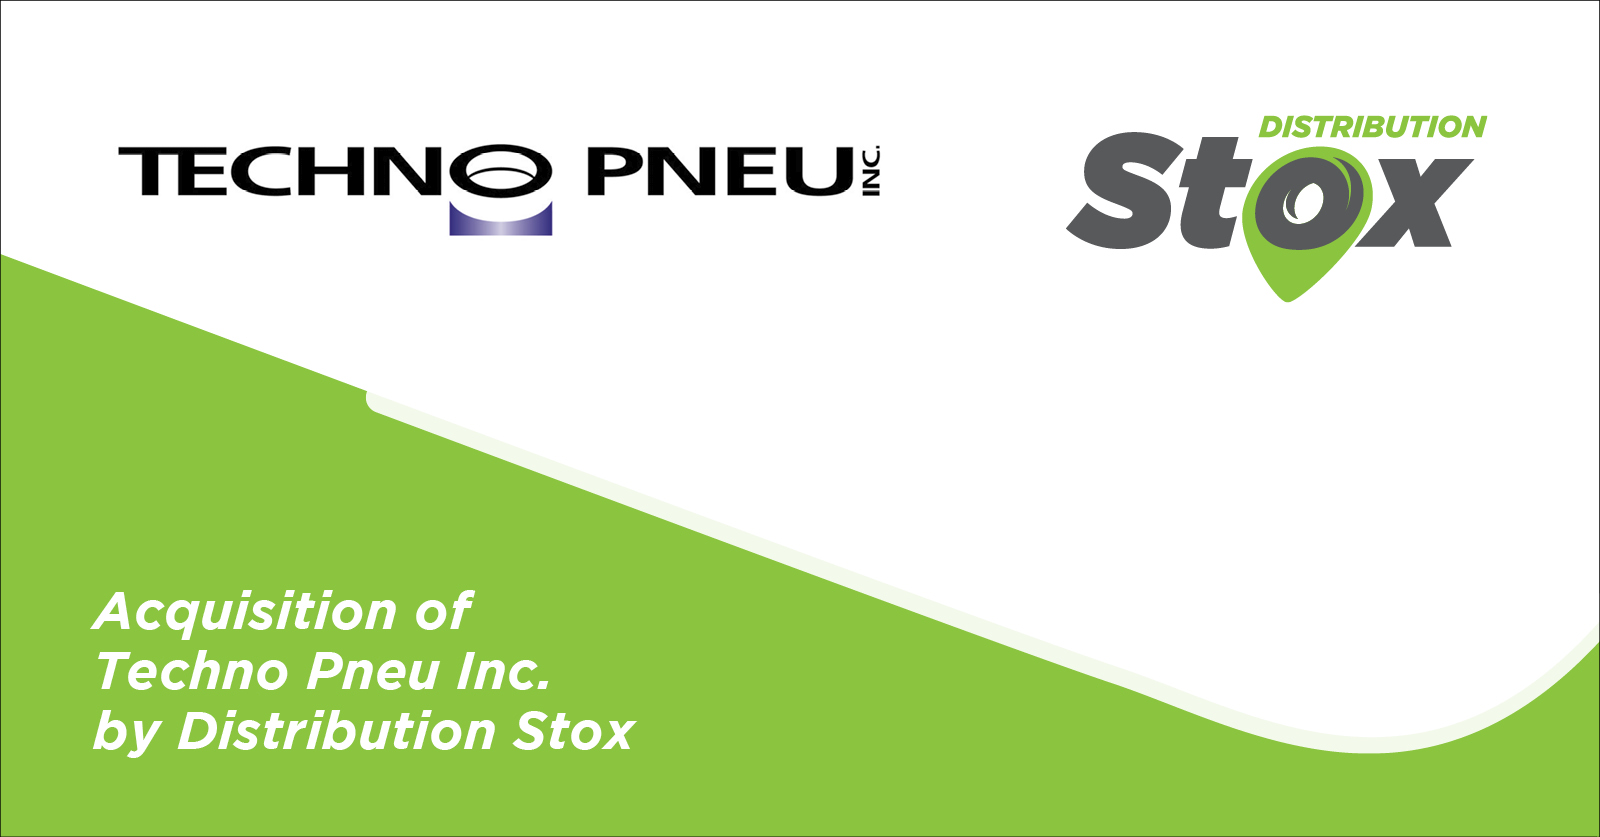 Distribution Stox announces the conclusion of an agreement to acquire the passenger car and light truck distribution division of Techno Pneu Inc.  